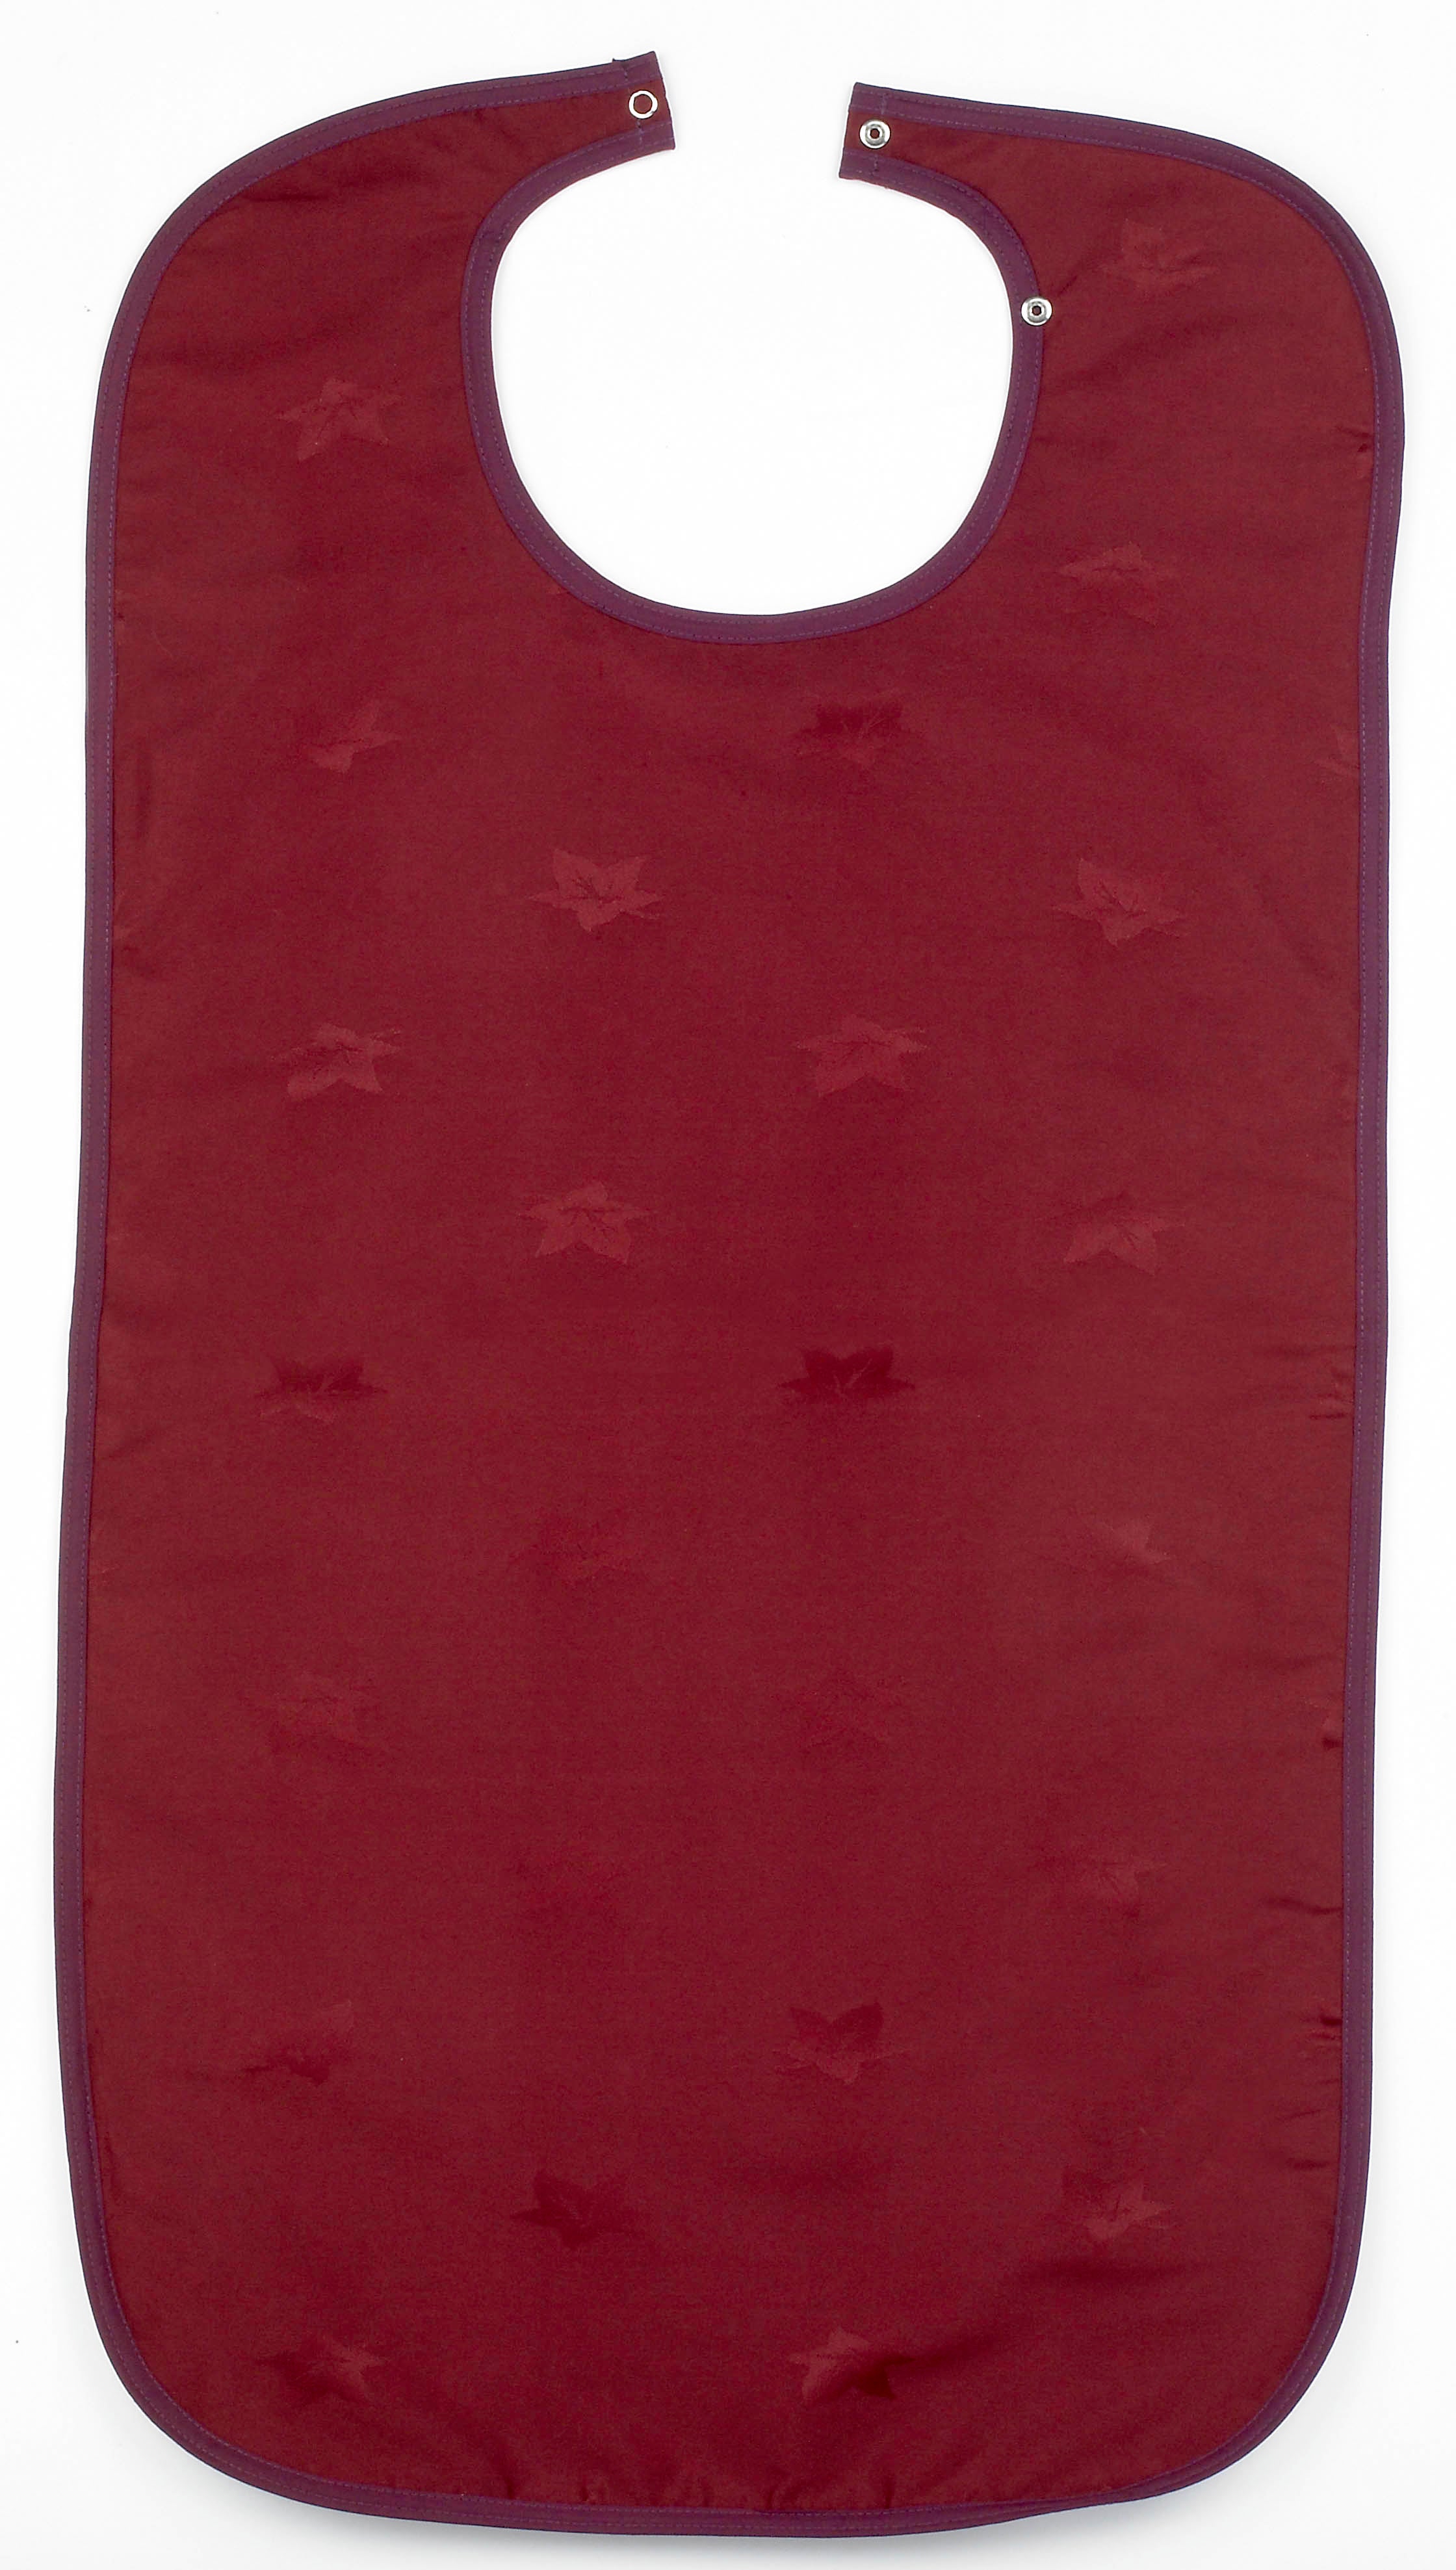 Maroon Adult Bib 45 x 90cm With Poppers